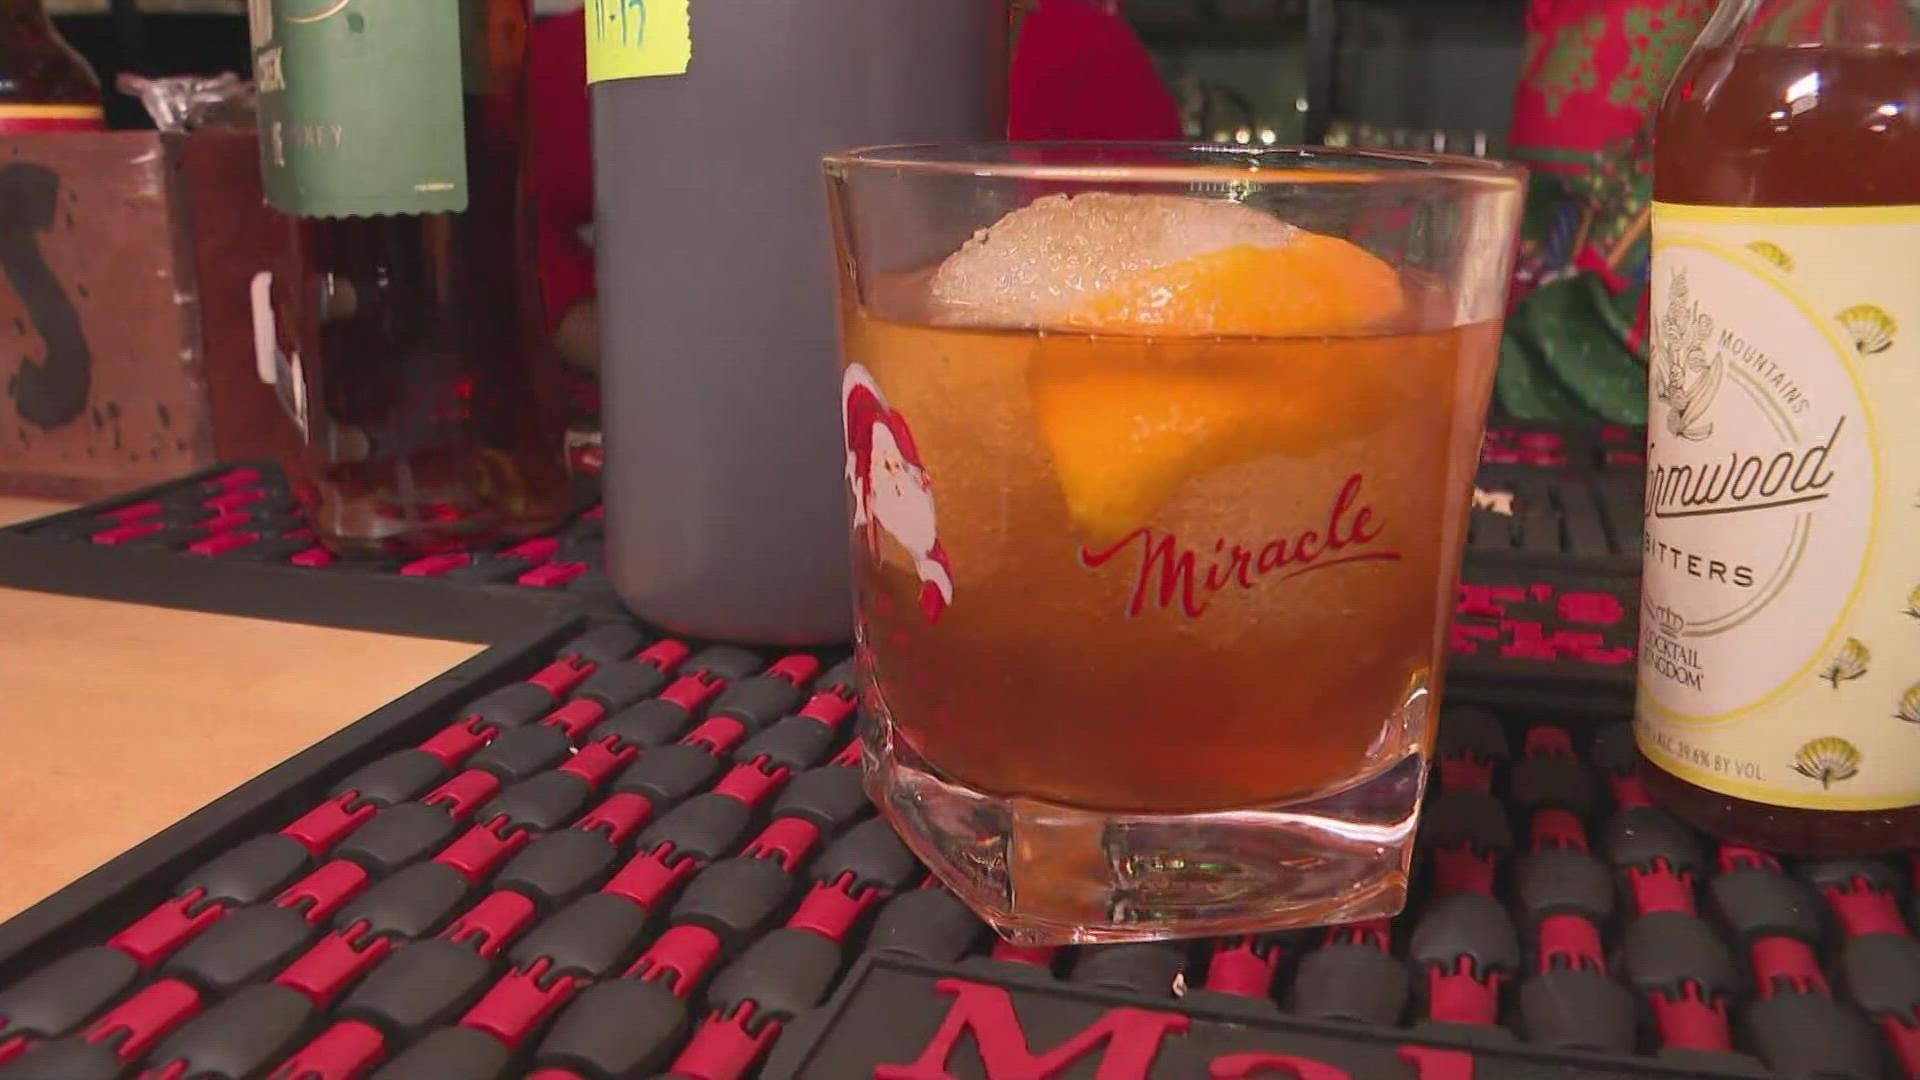 Holiday-themed bar "Miracle on Market" in Louisville is gearing up for Christmas season.